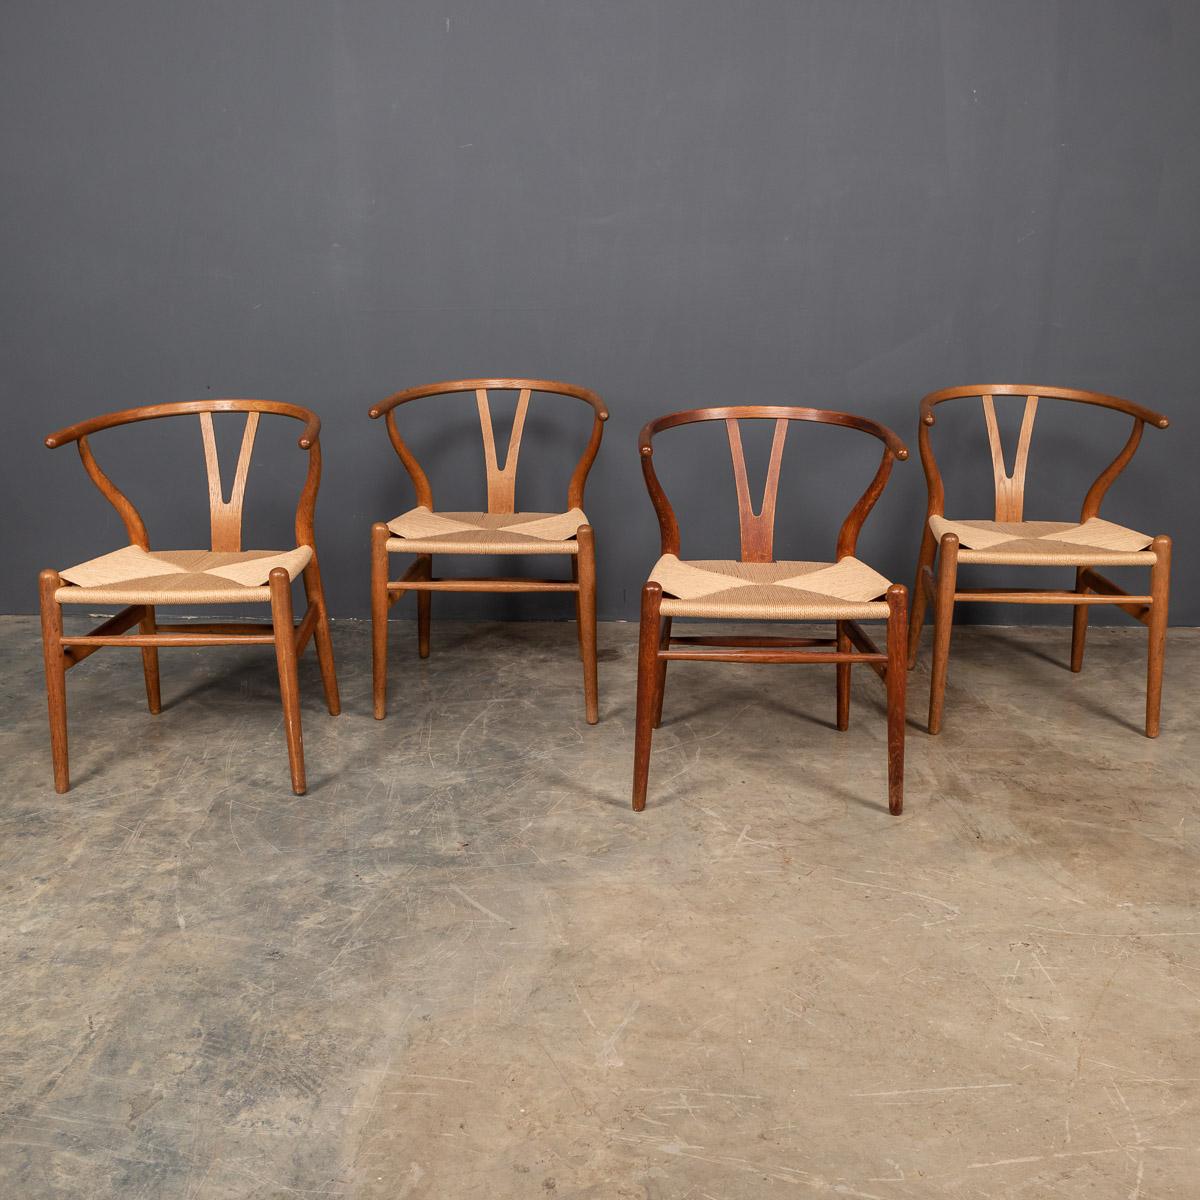 Iconic mid-20th century set of four Wishbone dining chairs, also known as the CH24 Chair or Y Chair is a chair designed by Hans Wegner in 1949 for Carl Hansen & Søn. The chair features a bentwood armrest and a paper cord rope seat in an woven